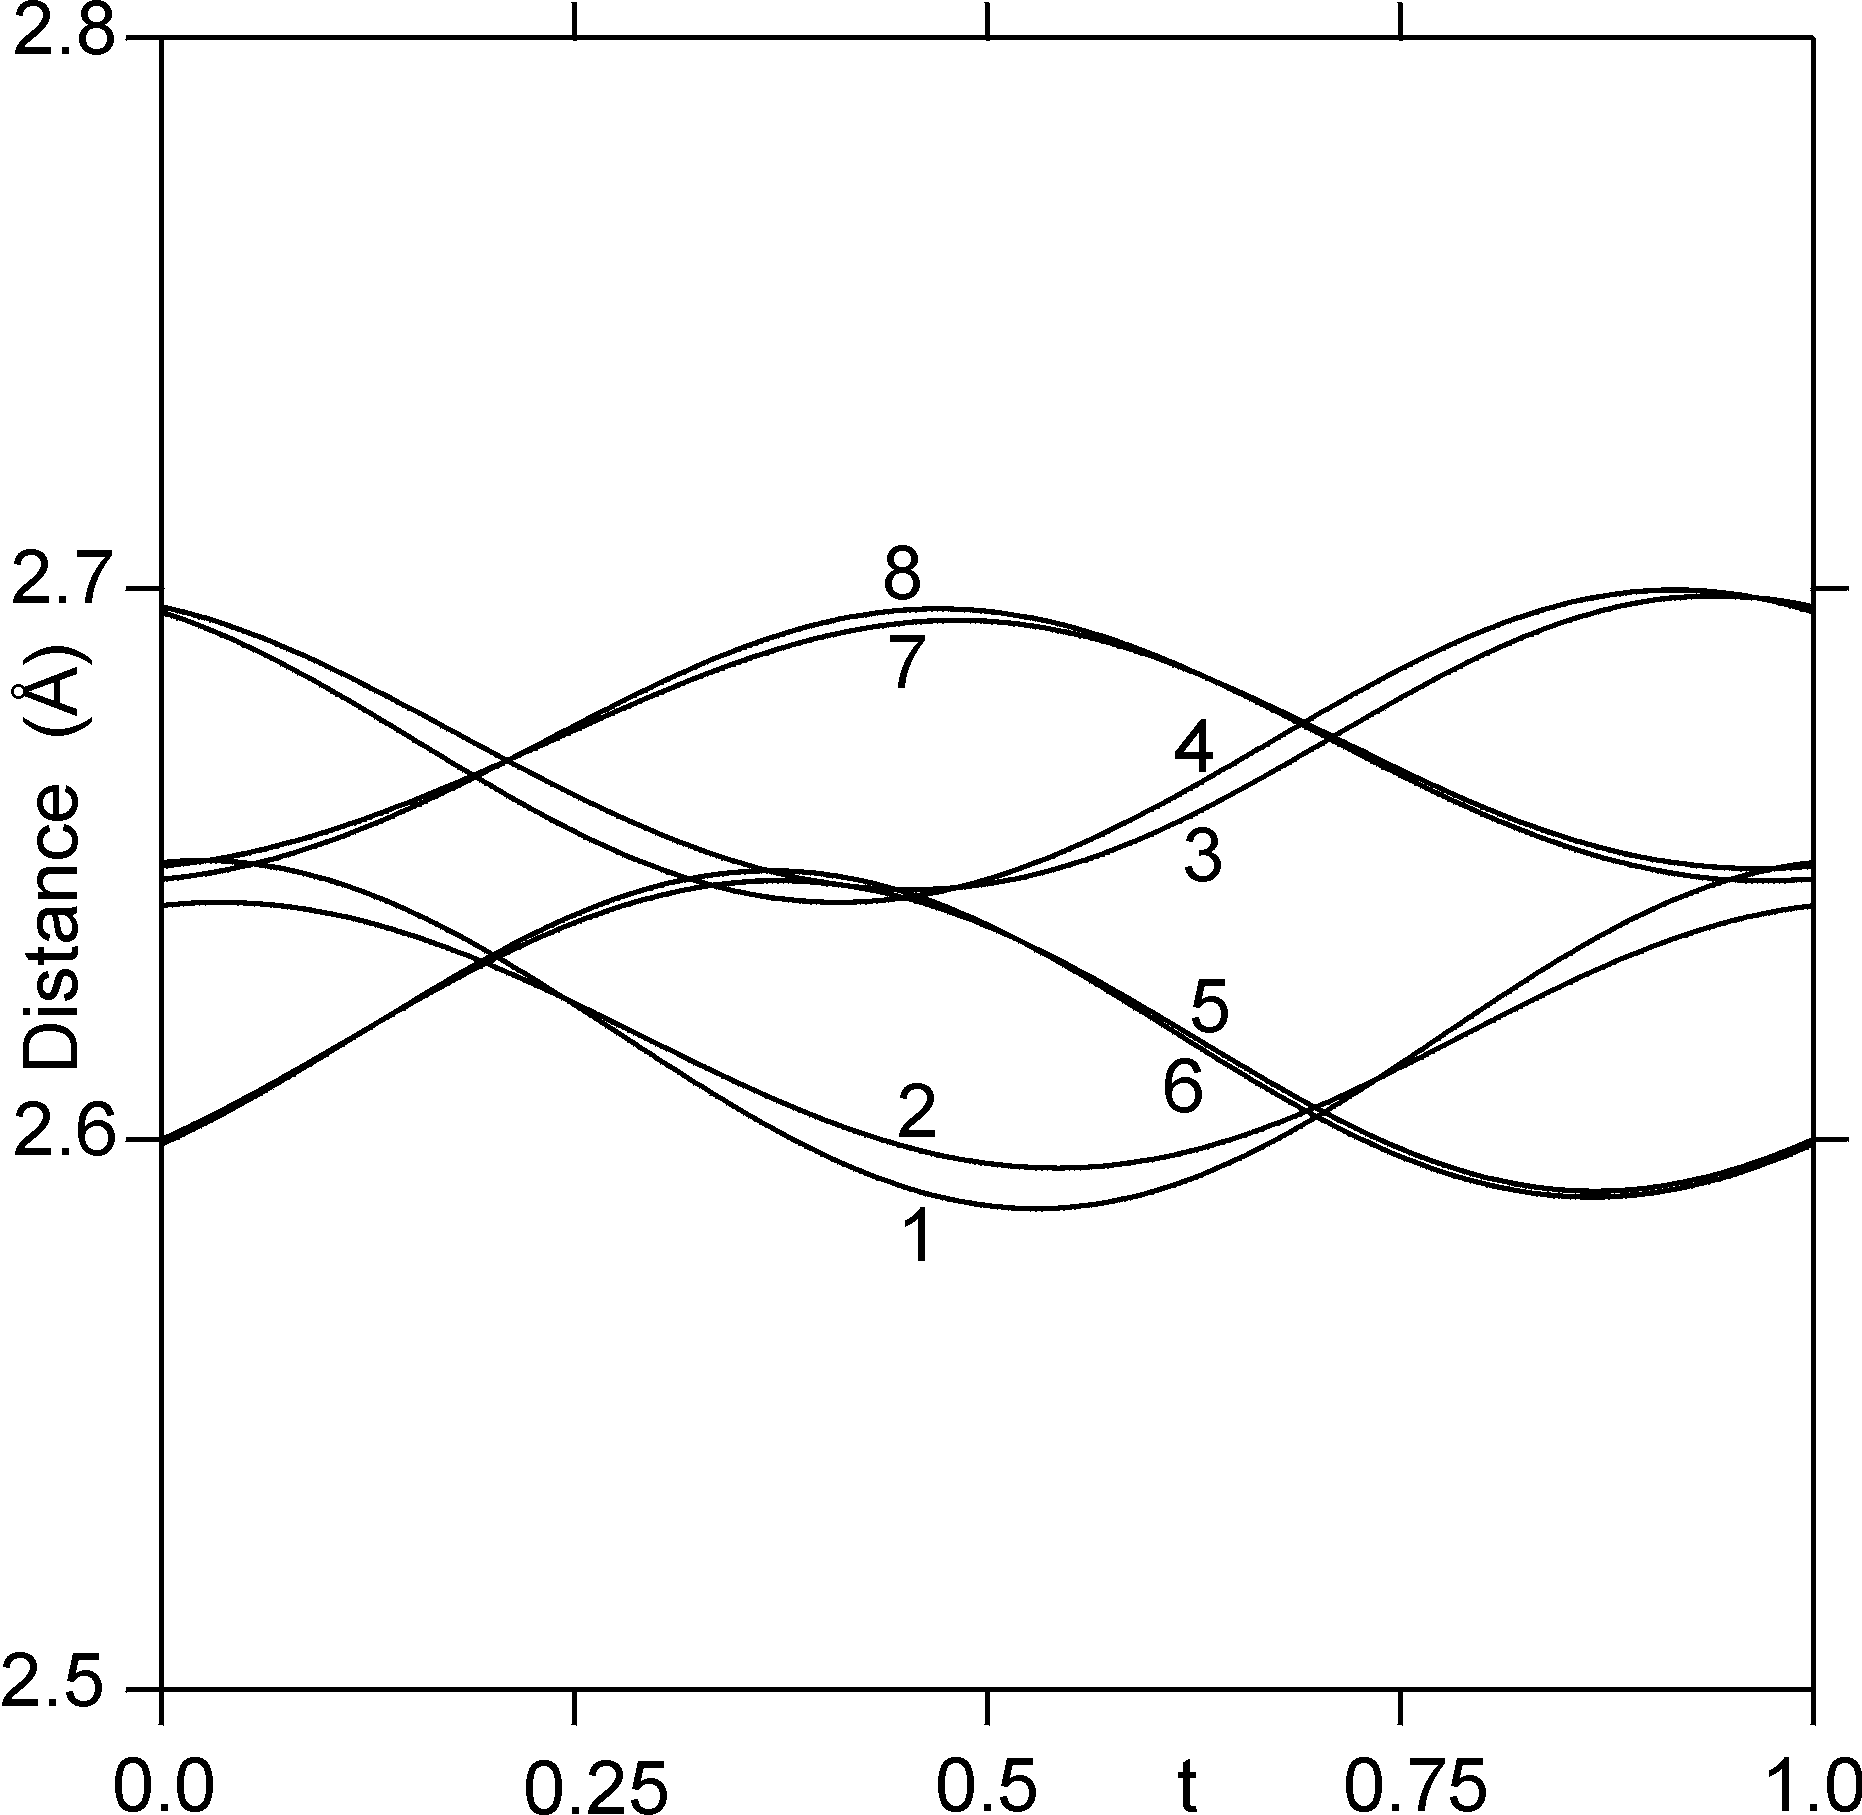 A figure of interatomic distances between Ta1 and the eight surrounding Se atoms as a function of the fourth superspace coordinate t